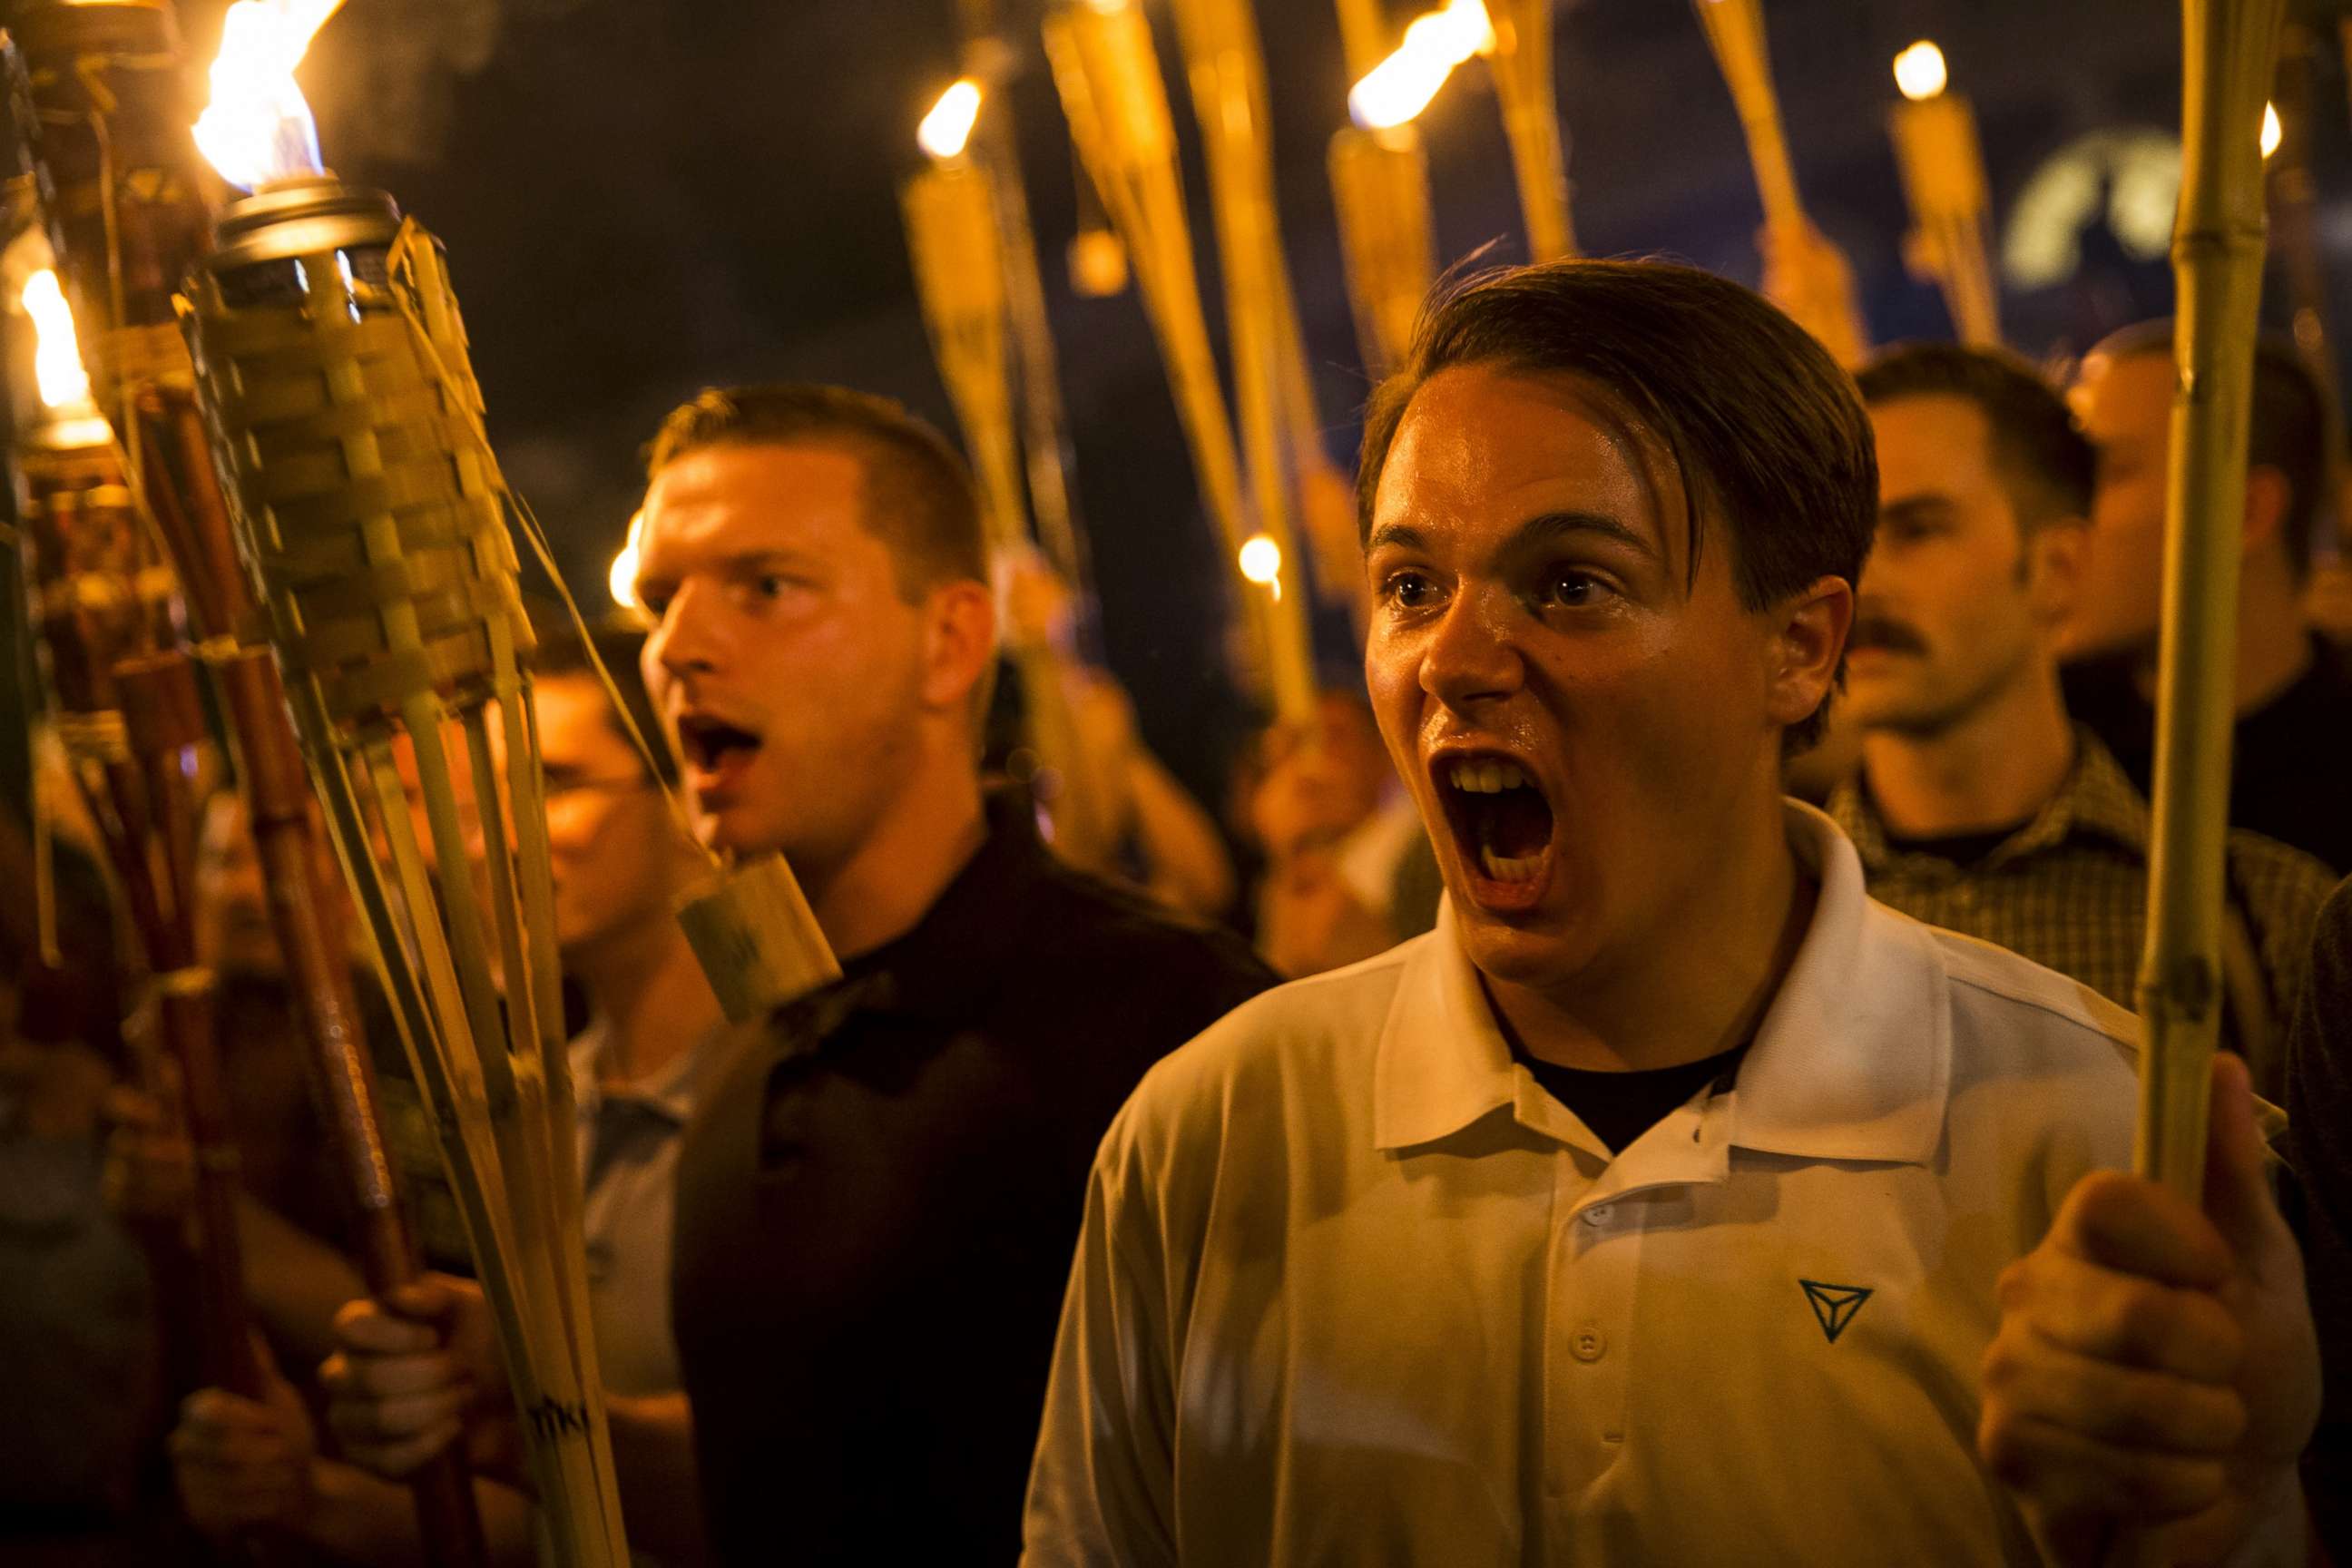 PHOTO: A group primarily composed of self-identified Neo Nazis, Alt-Right and White Supremacists chants at counter-protesters after marching through the UVA campus with torches in Charlottesville, Va., Aug. 11, 2017.